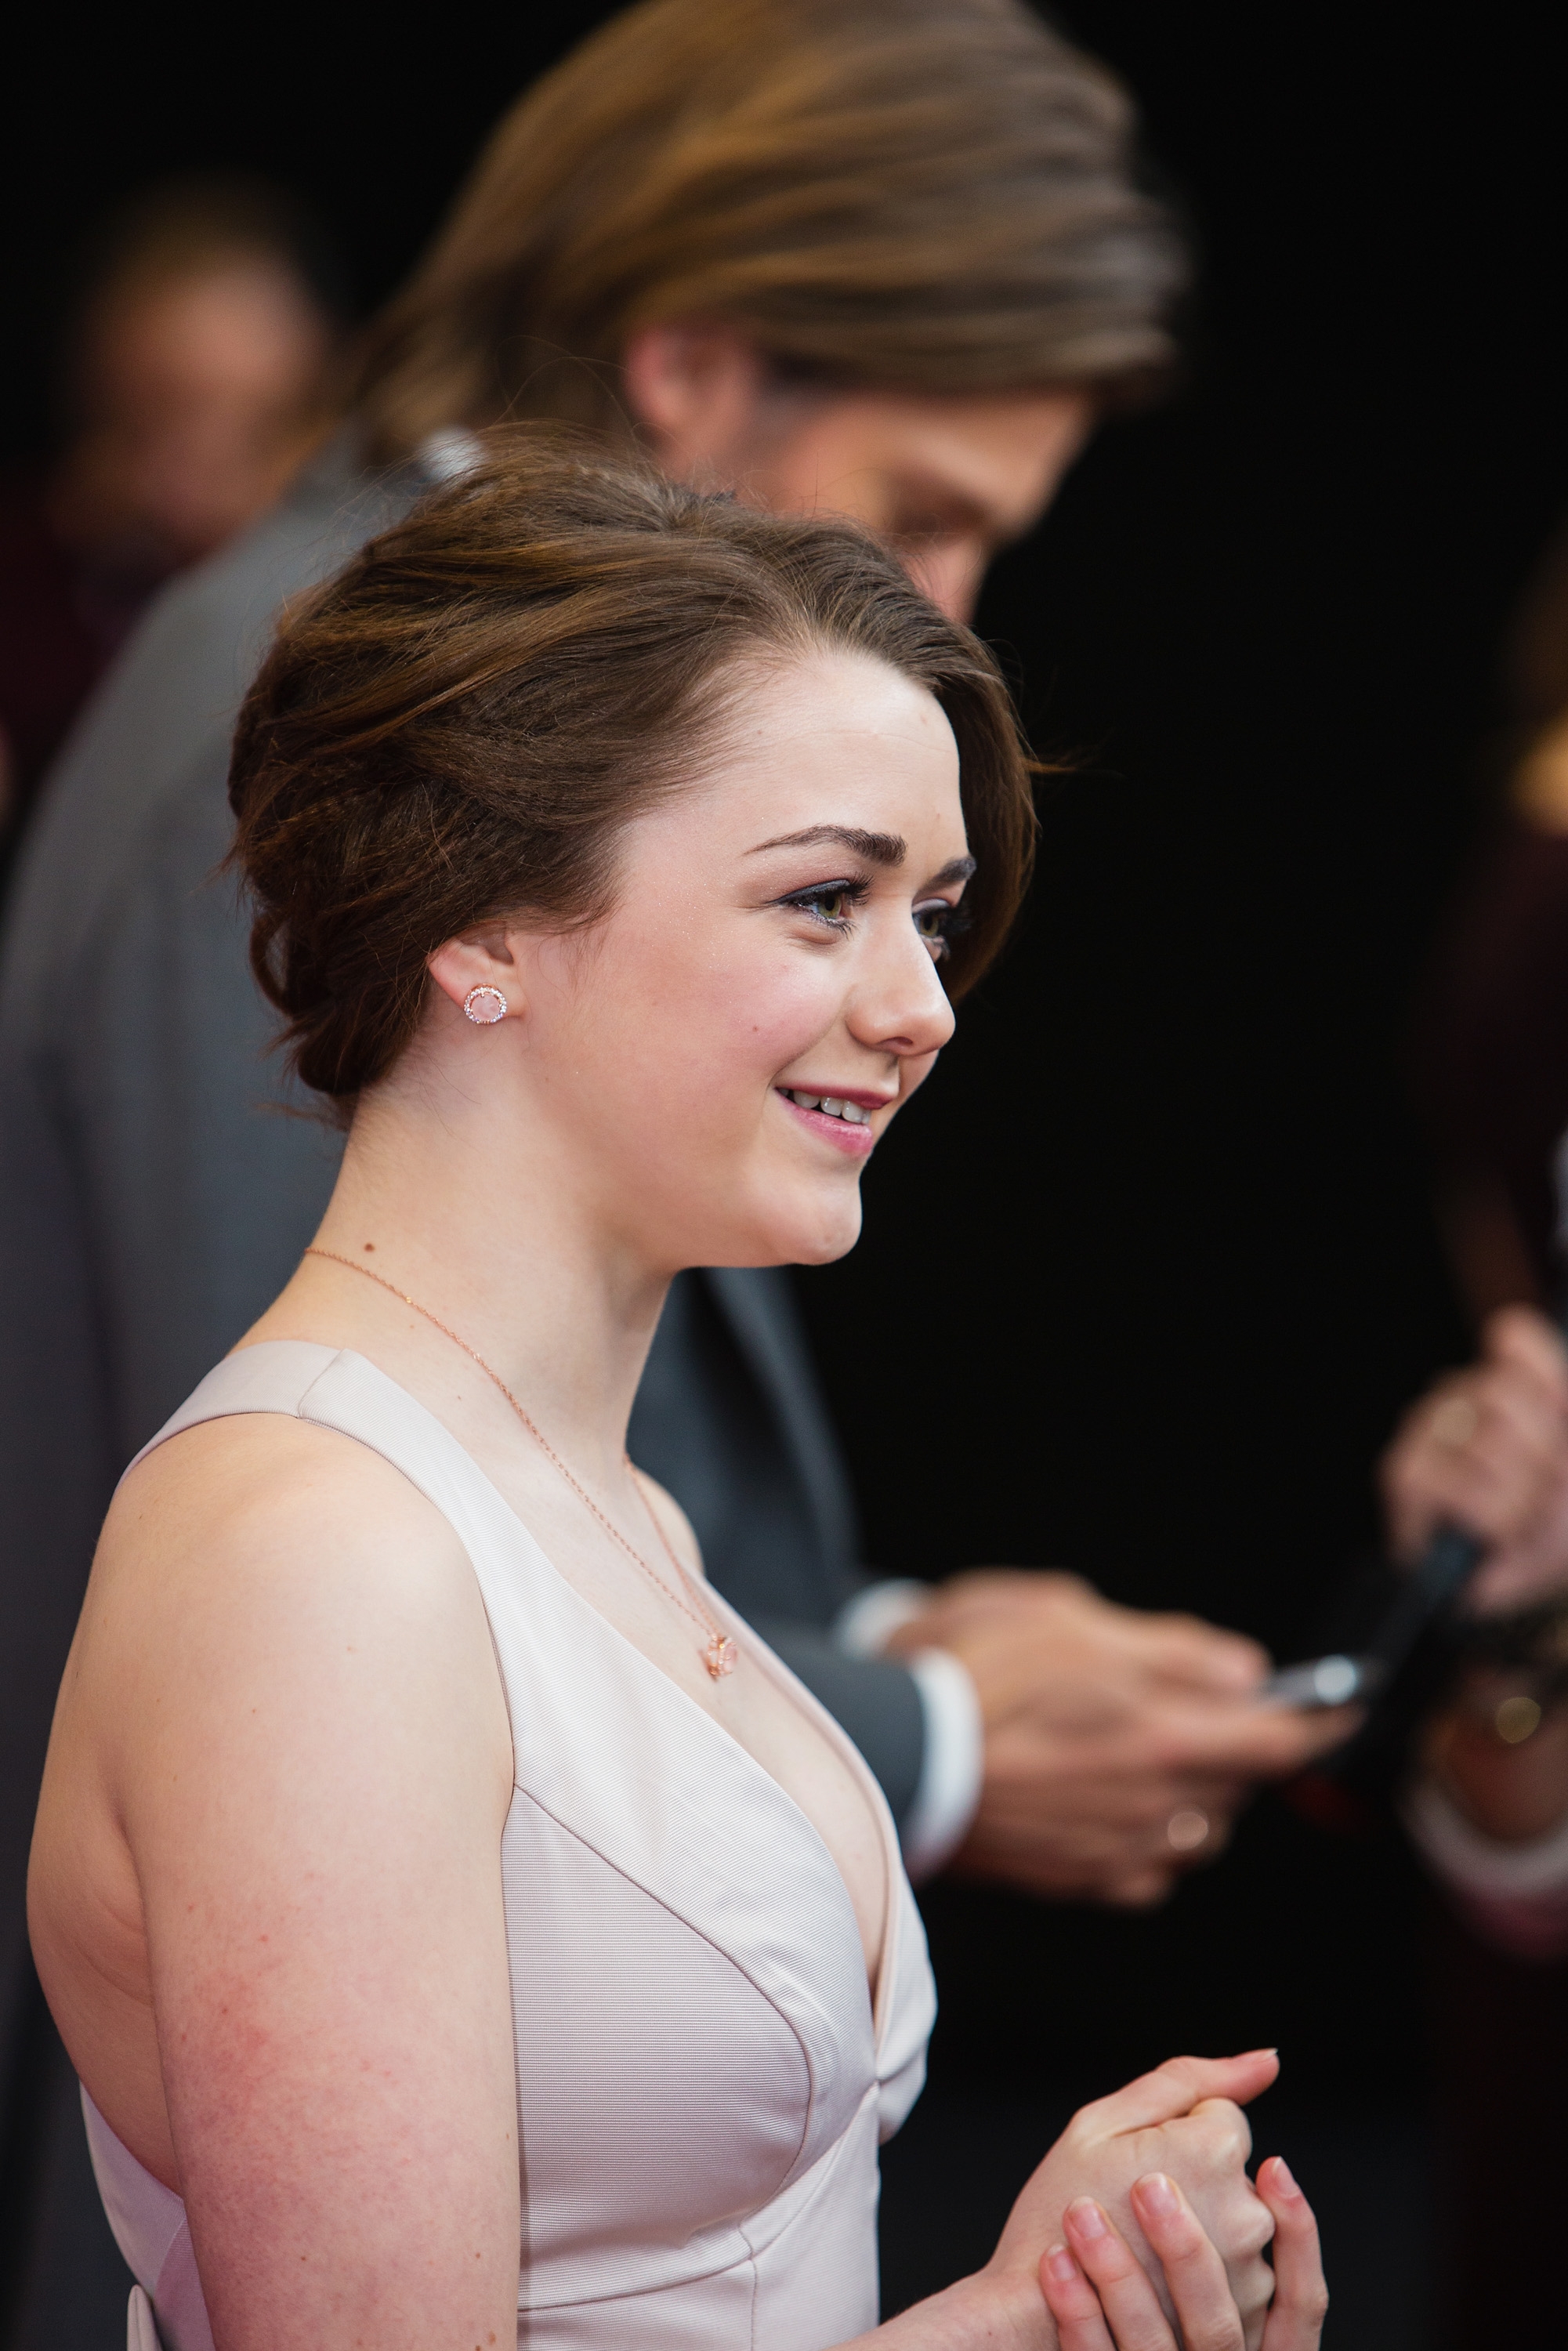 https://maisiewilliams.org/gallery/albums/Public Apperances/2013/March 21st-Game of Thrones Season 3 Seattle Premiere/0011.jpg